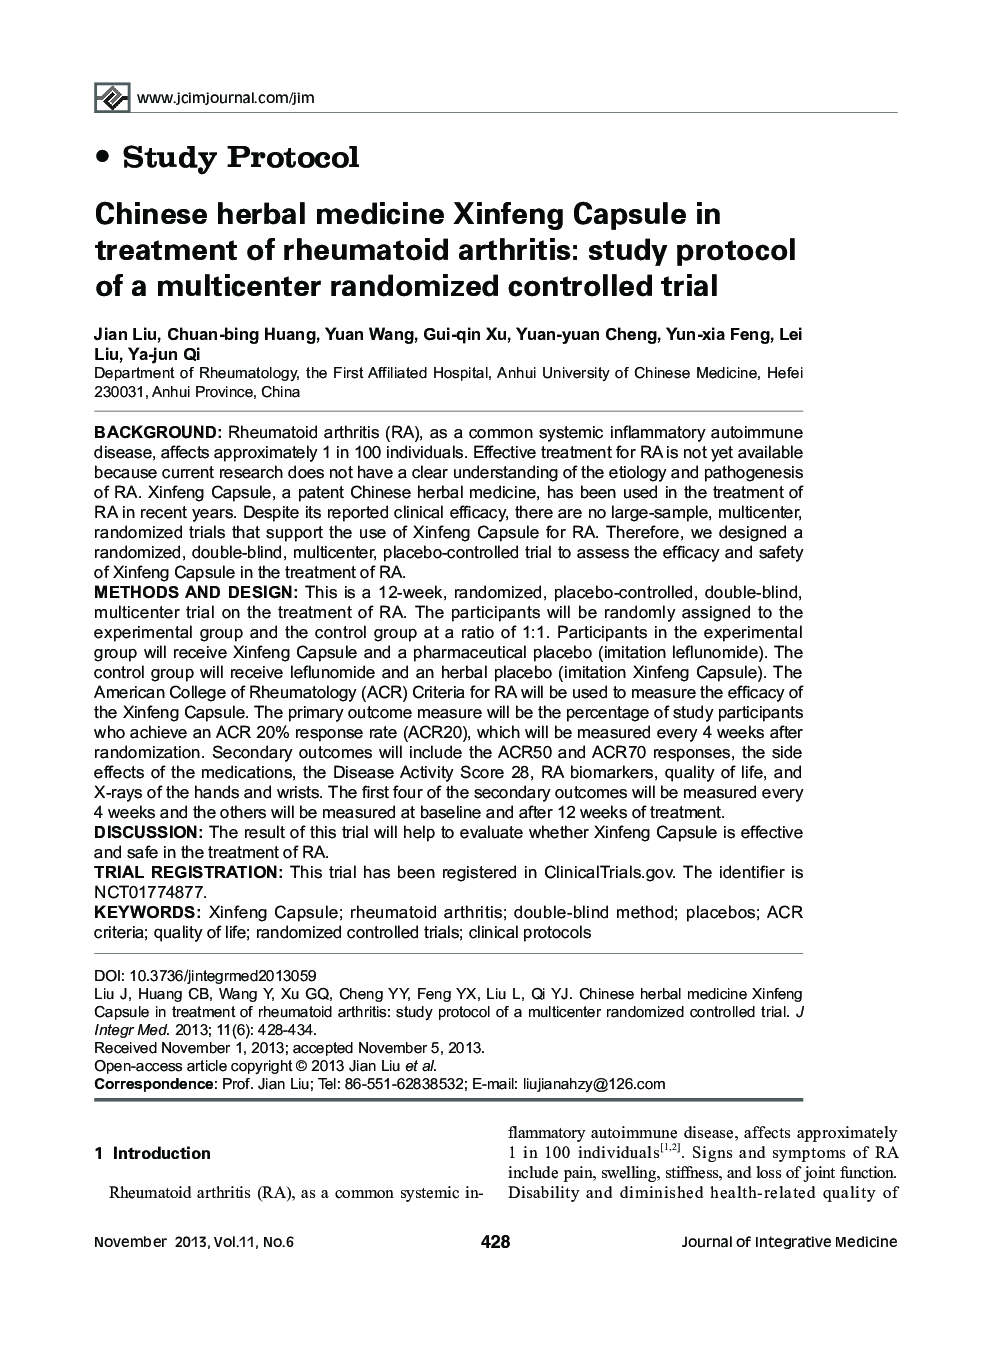 Chinese herbal medicine Xinfeng Capsule in treatment of rheumatoid arthritis: study protocol of a multicenter randomized controlled trial